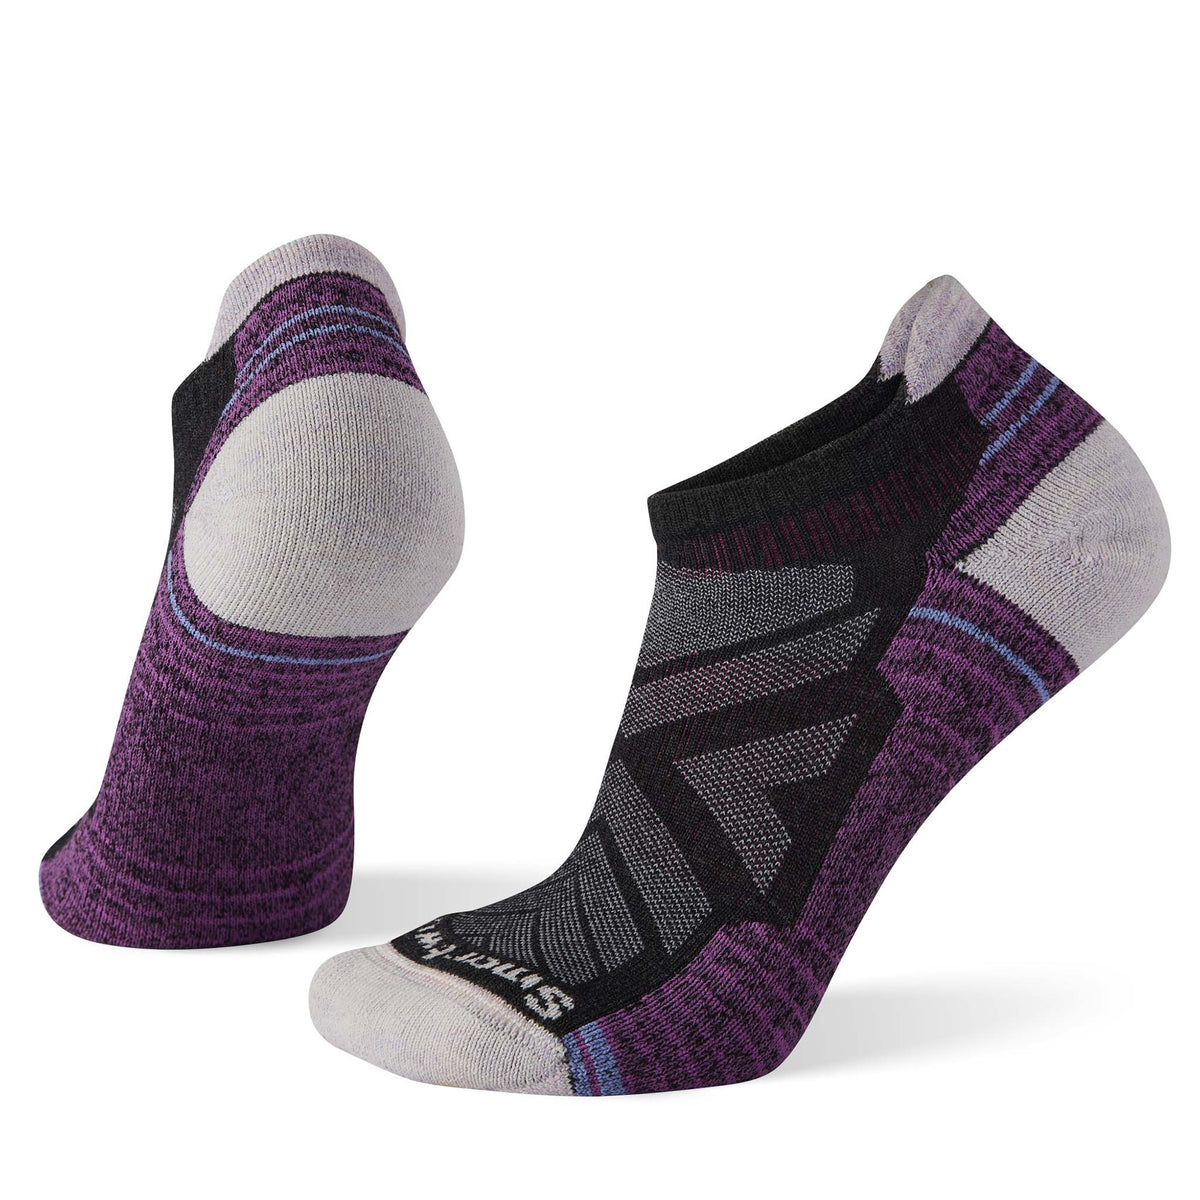 Smartwool Performance Hike Light Cushion chaussettes basses charcoal femme